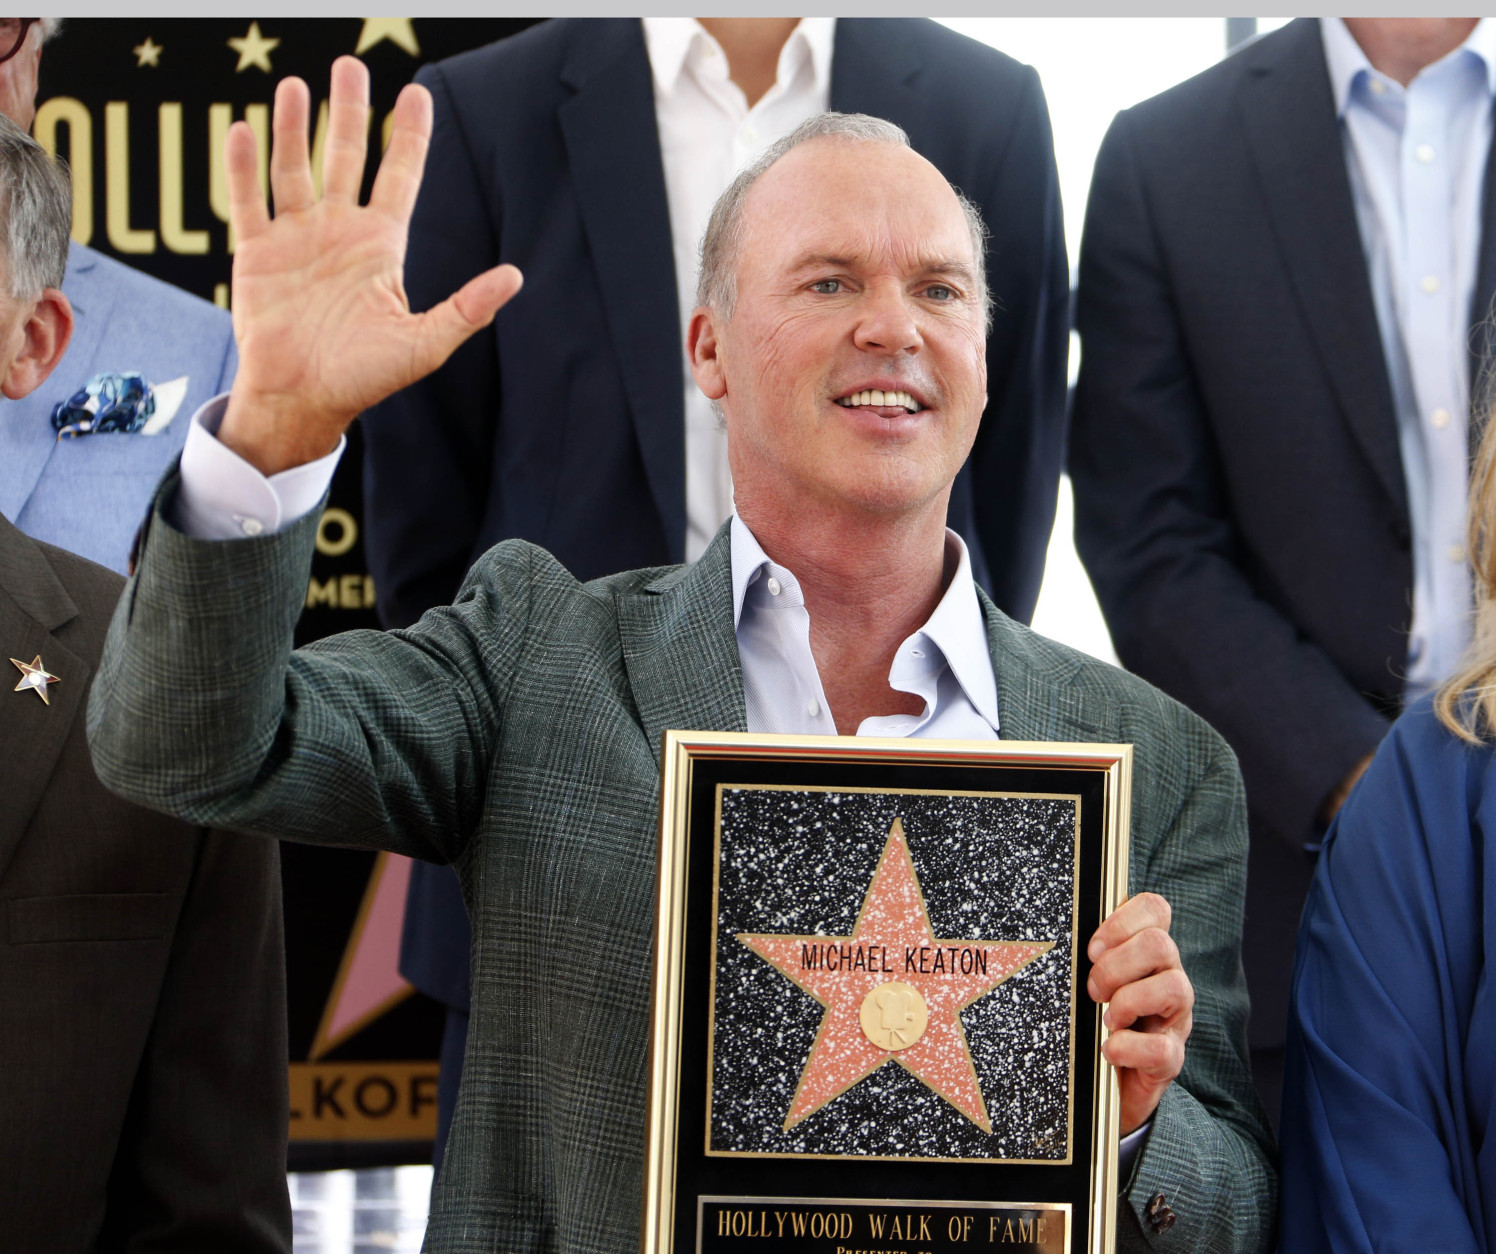 Academy Award winning actor Michael Keaton waves at a ceremony awarding him with a star on the Hollywood Walk of Fame in Los Angeles, Thursday, July 28, 2016. (AP Photo/Nick Ut)